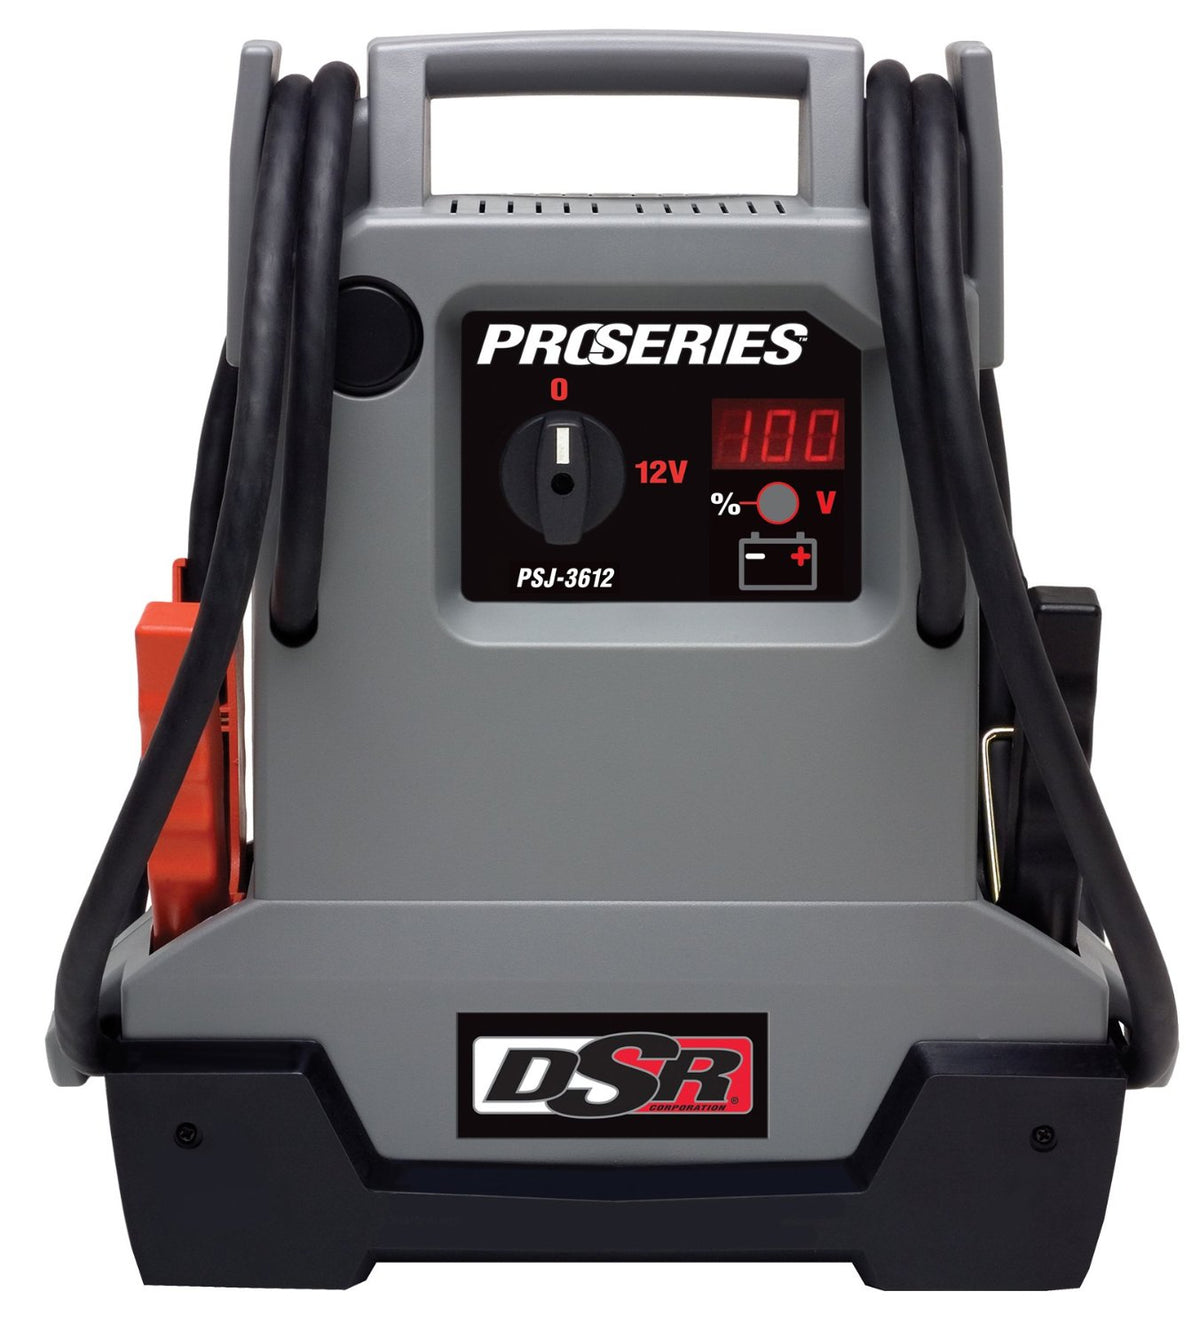 Buy dsr proseries psj-3612 - Online store for automotive, jump starters / systems in USA, on sale, low price, discount deals, coupon code